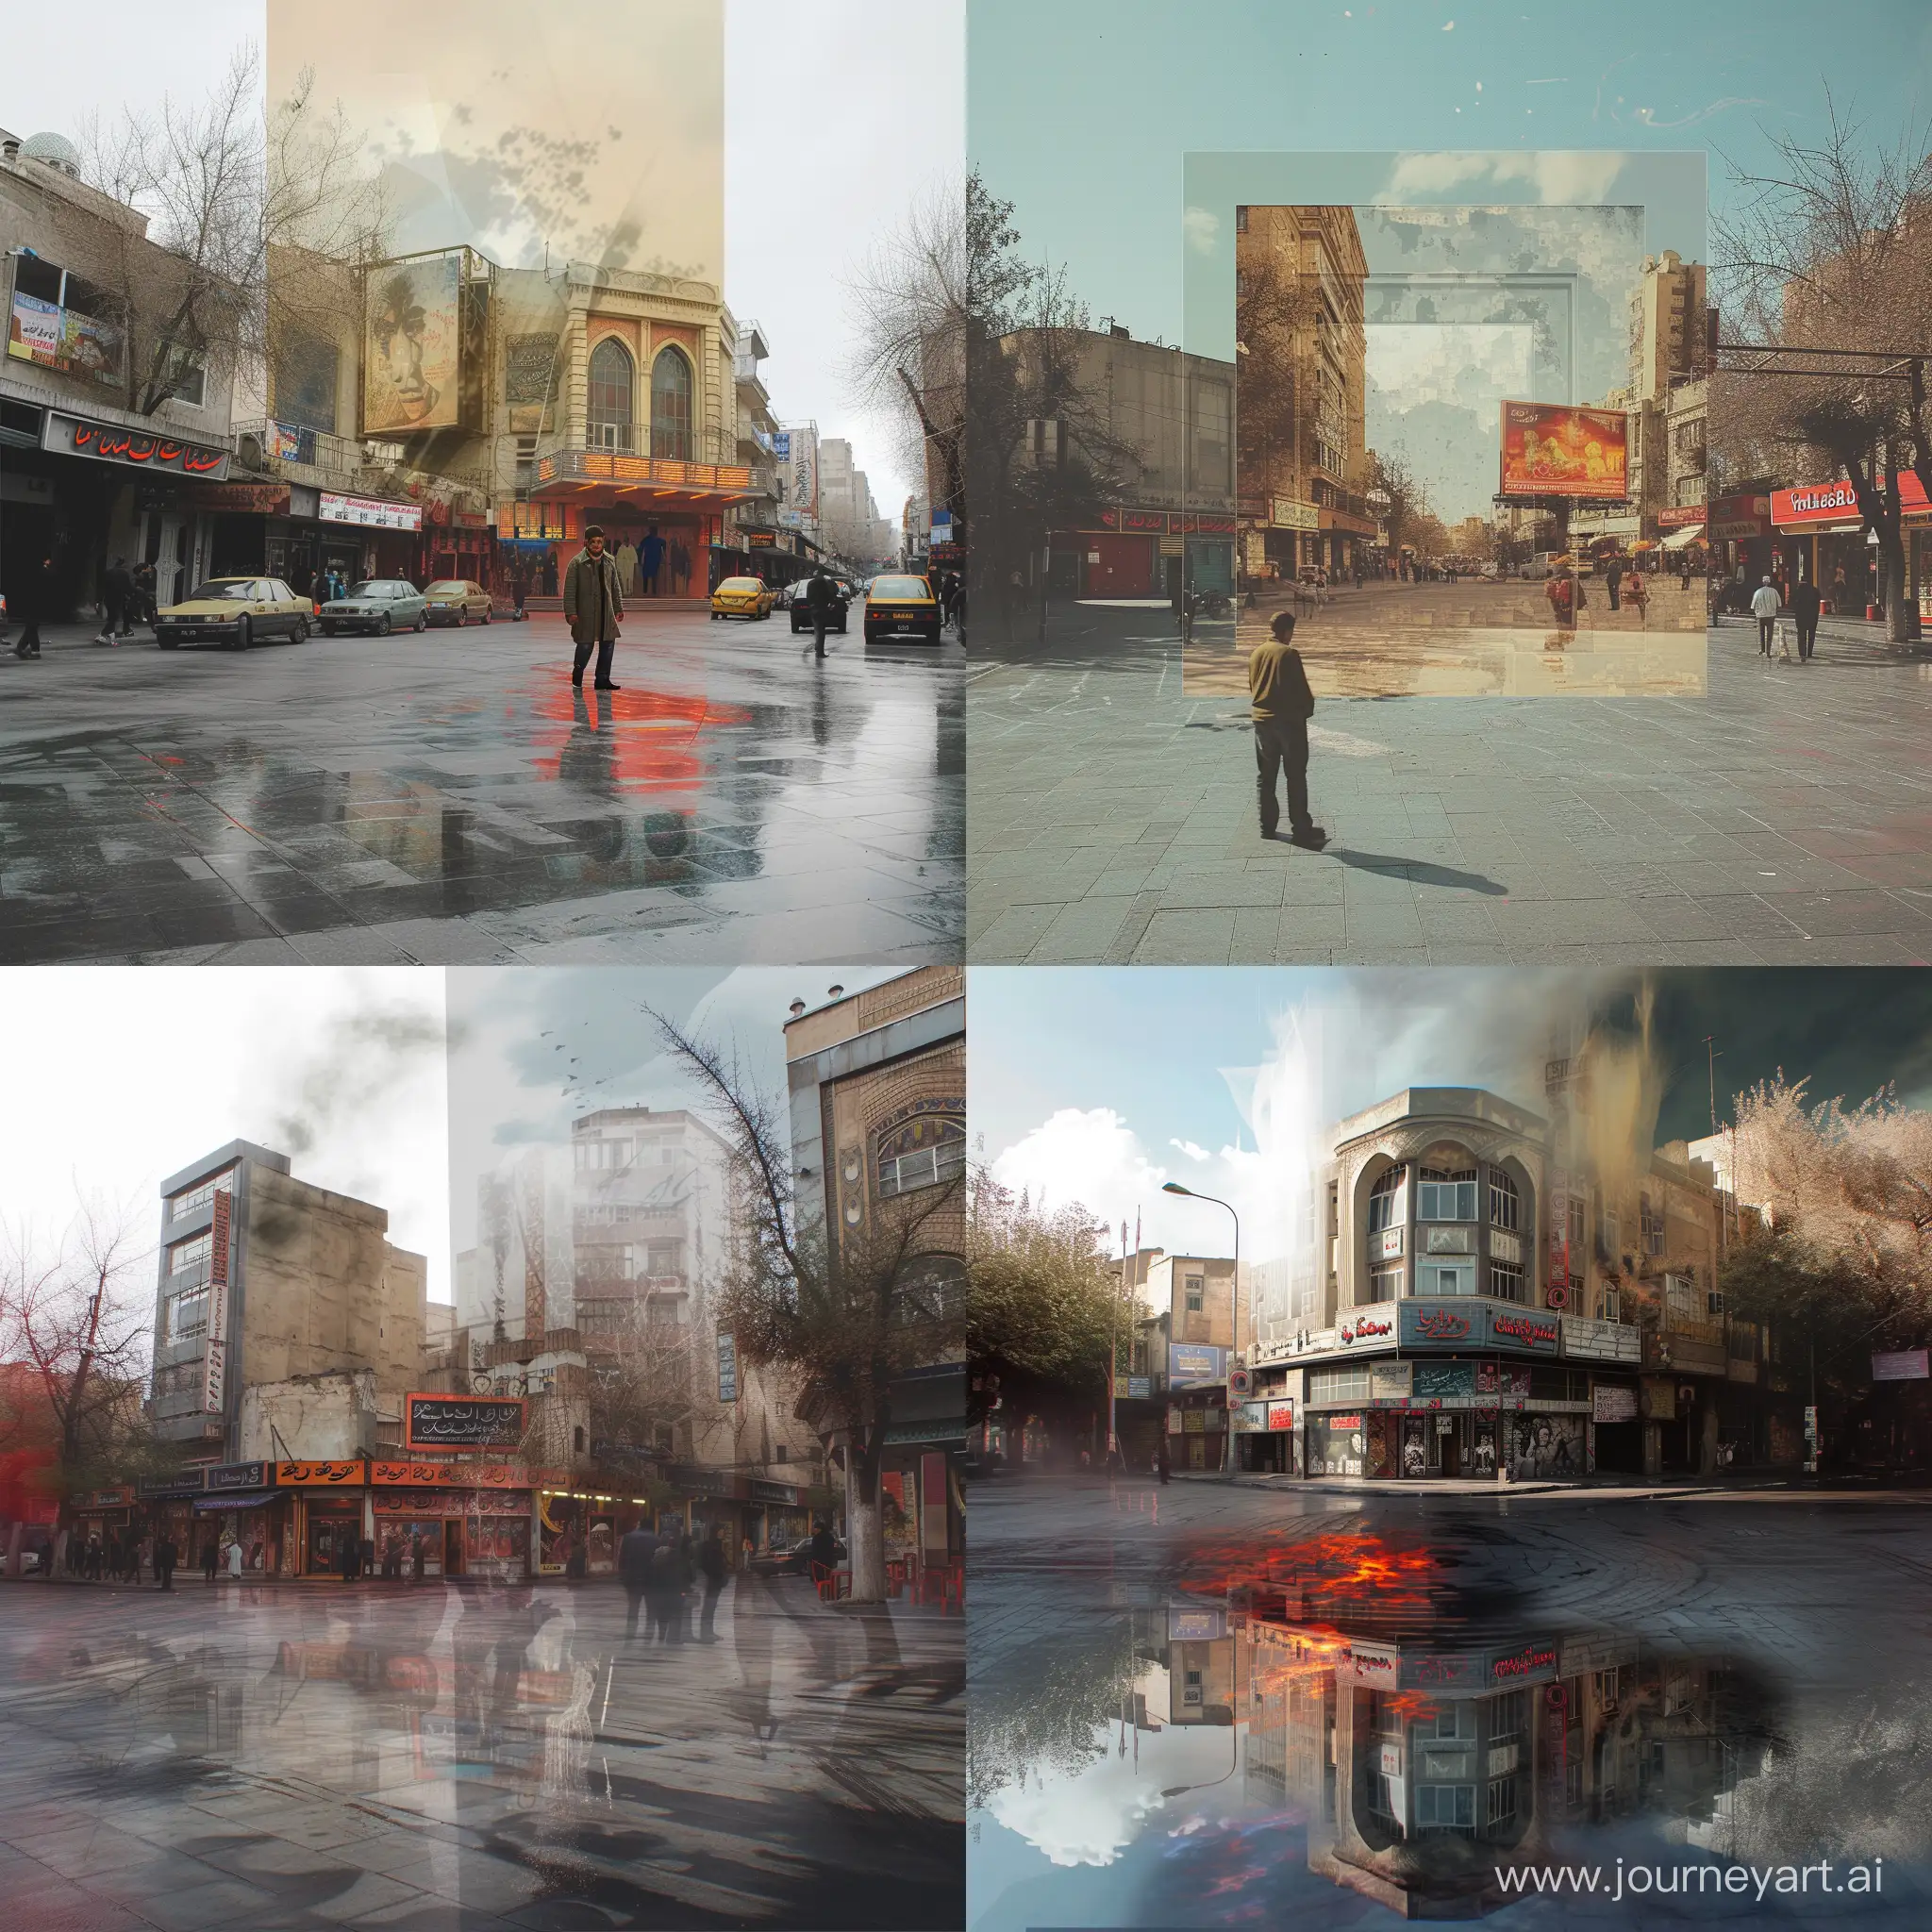 Manipulate a real image of Tehran's Englebal Street. This collage is done not too intense and big. However, some parts of the space, such as buildings or cinemas around the square, may change. The final output of the image can take on an eerie atmosphere.